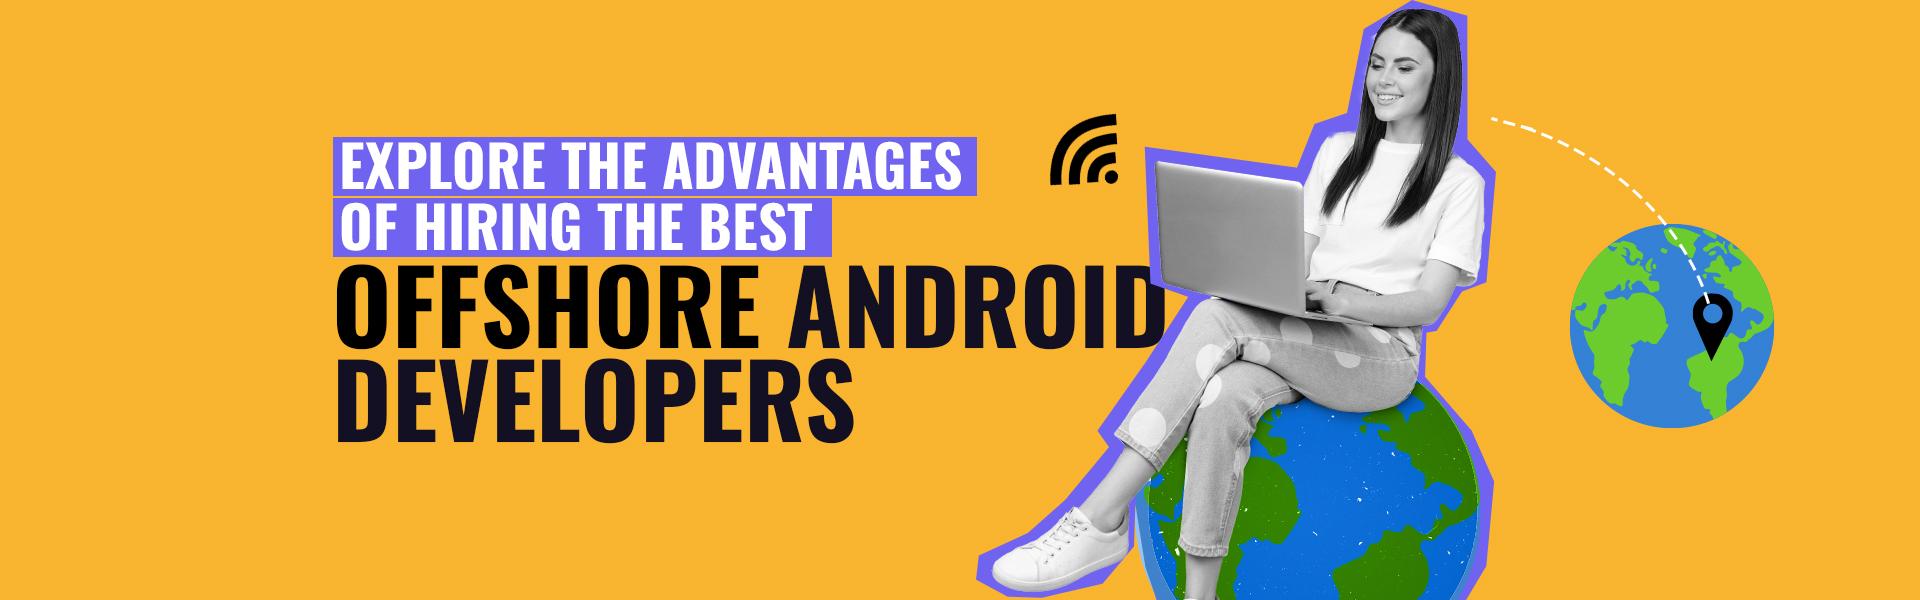 CC-blog_Explore-the-Advantages-of-Hiring-the-Best-Offshore-Android-Developers_main-banner